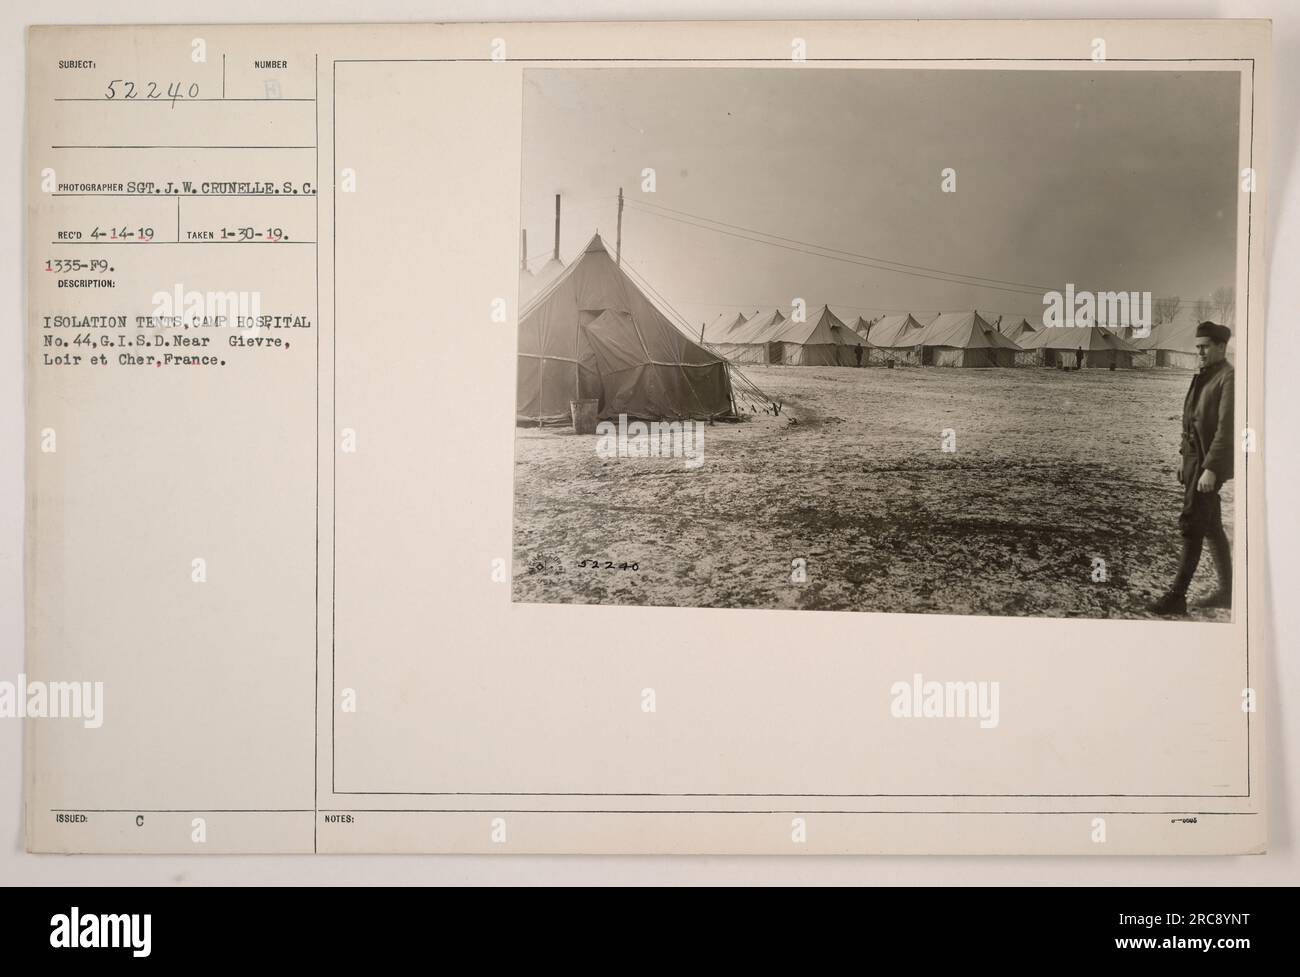 Isolation tents being issued at Camp Hospital No. 44, G.I.S.D. near Gievre, Loire et Cher, France. The photograph was taken on January 30, 1919, by Sergeant J.W. Crunelle. It is numbered 52240 and re Stock Photo